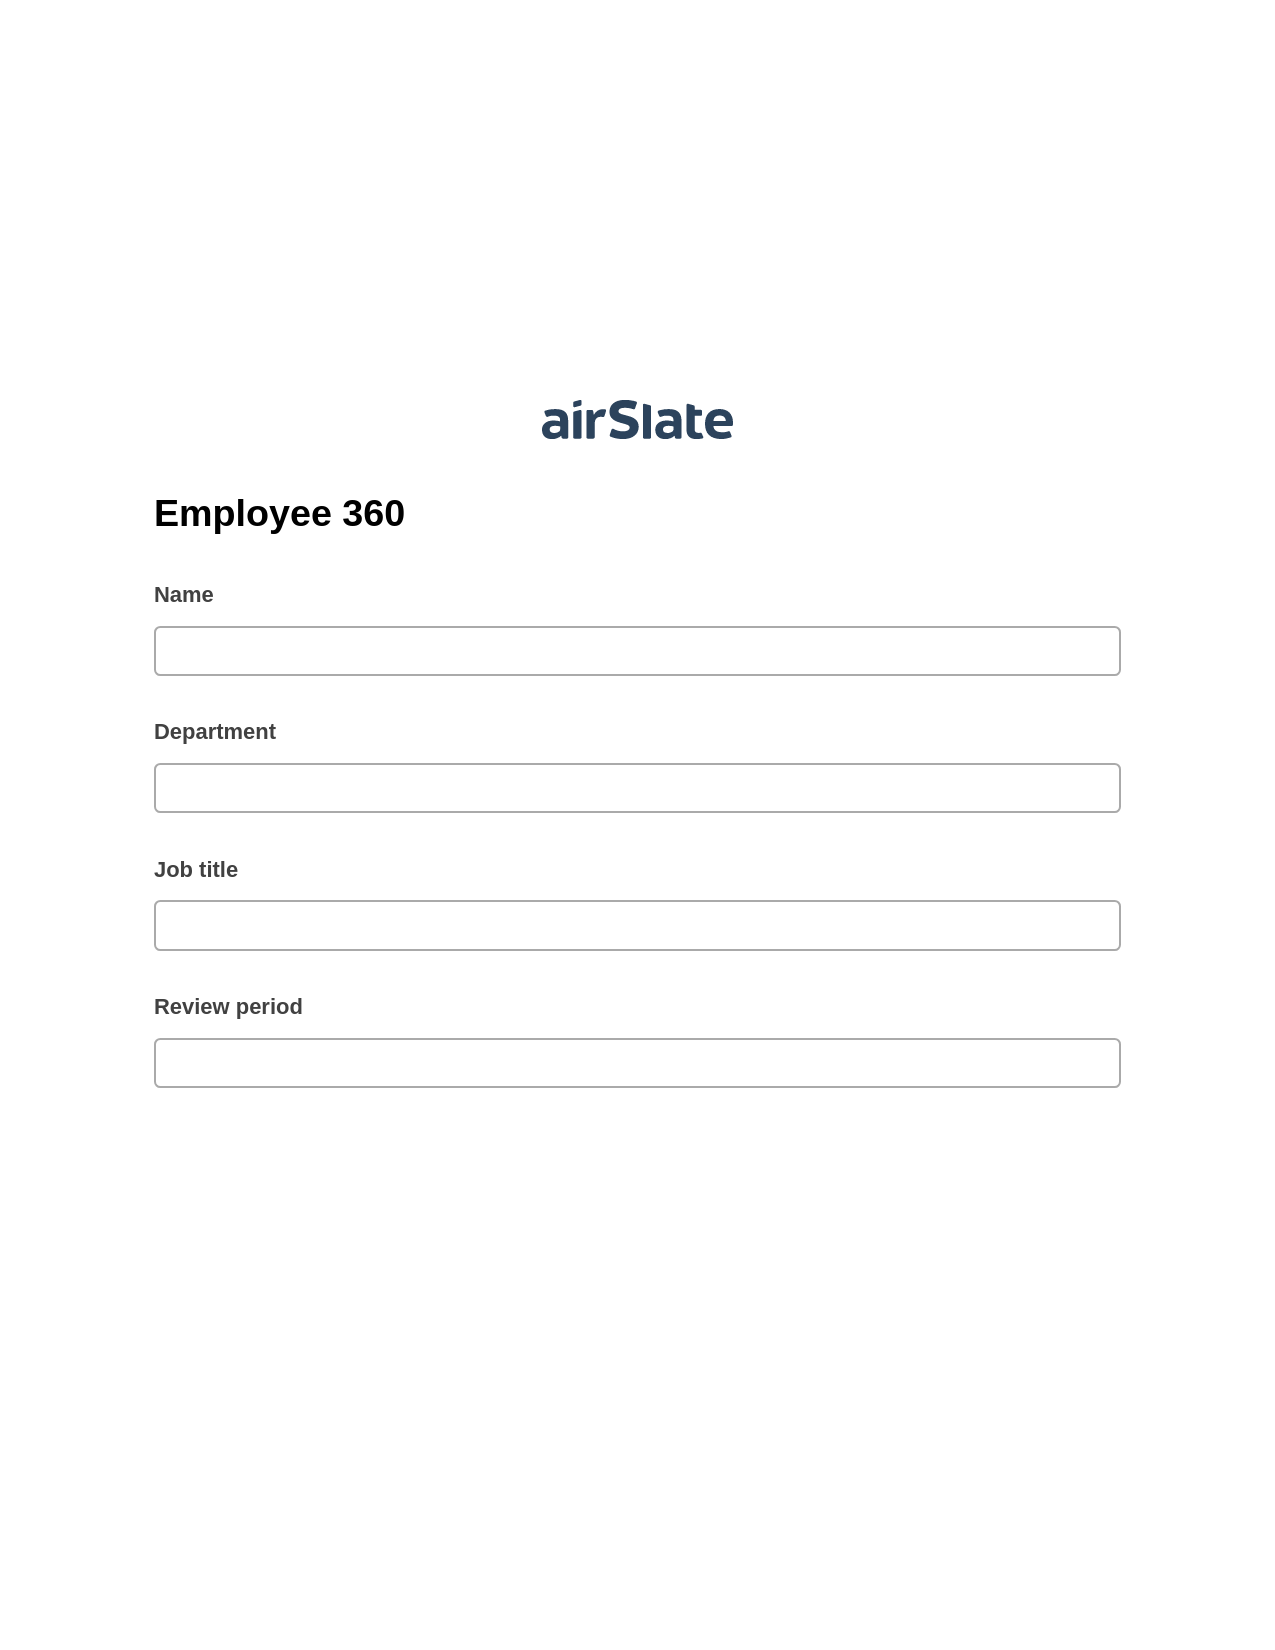 Employee 360 Pre-fill from Litmos bot, Update MS Dynamics 365 Record Bot, Export to Excel 365 Bot